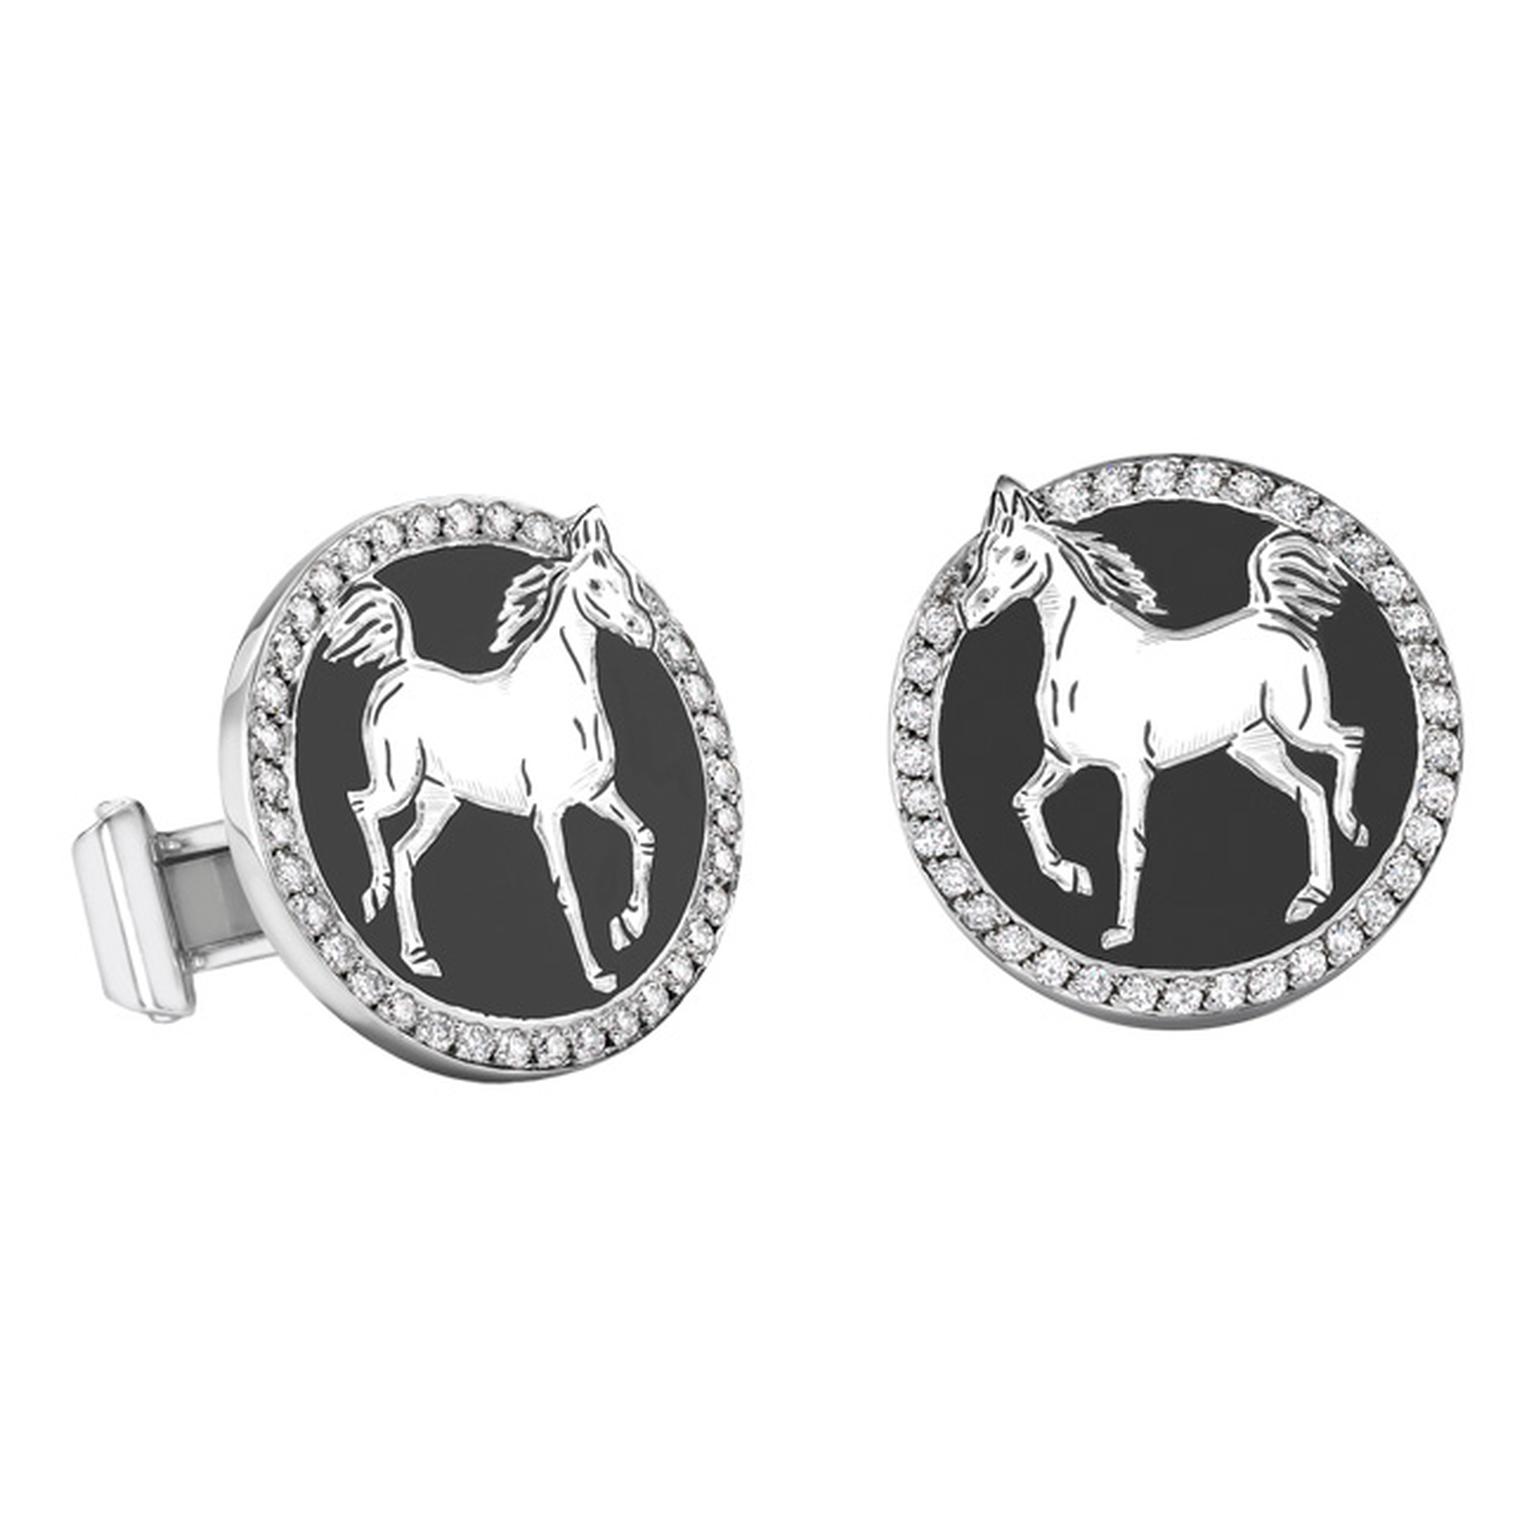 Theo_Fennell_Hand_Painted_Enamel_and_Diamond-_Horse_Cufflinks_20140123_Main